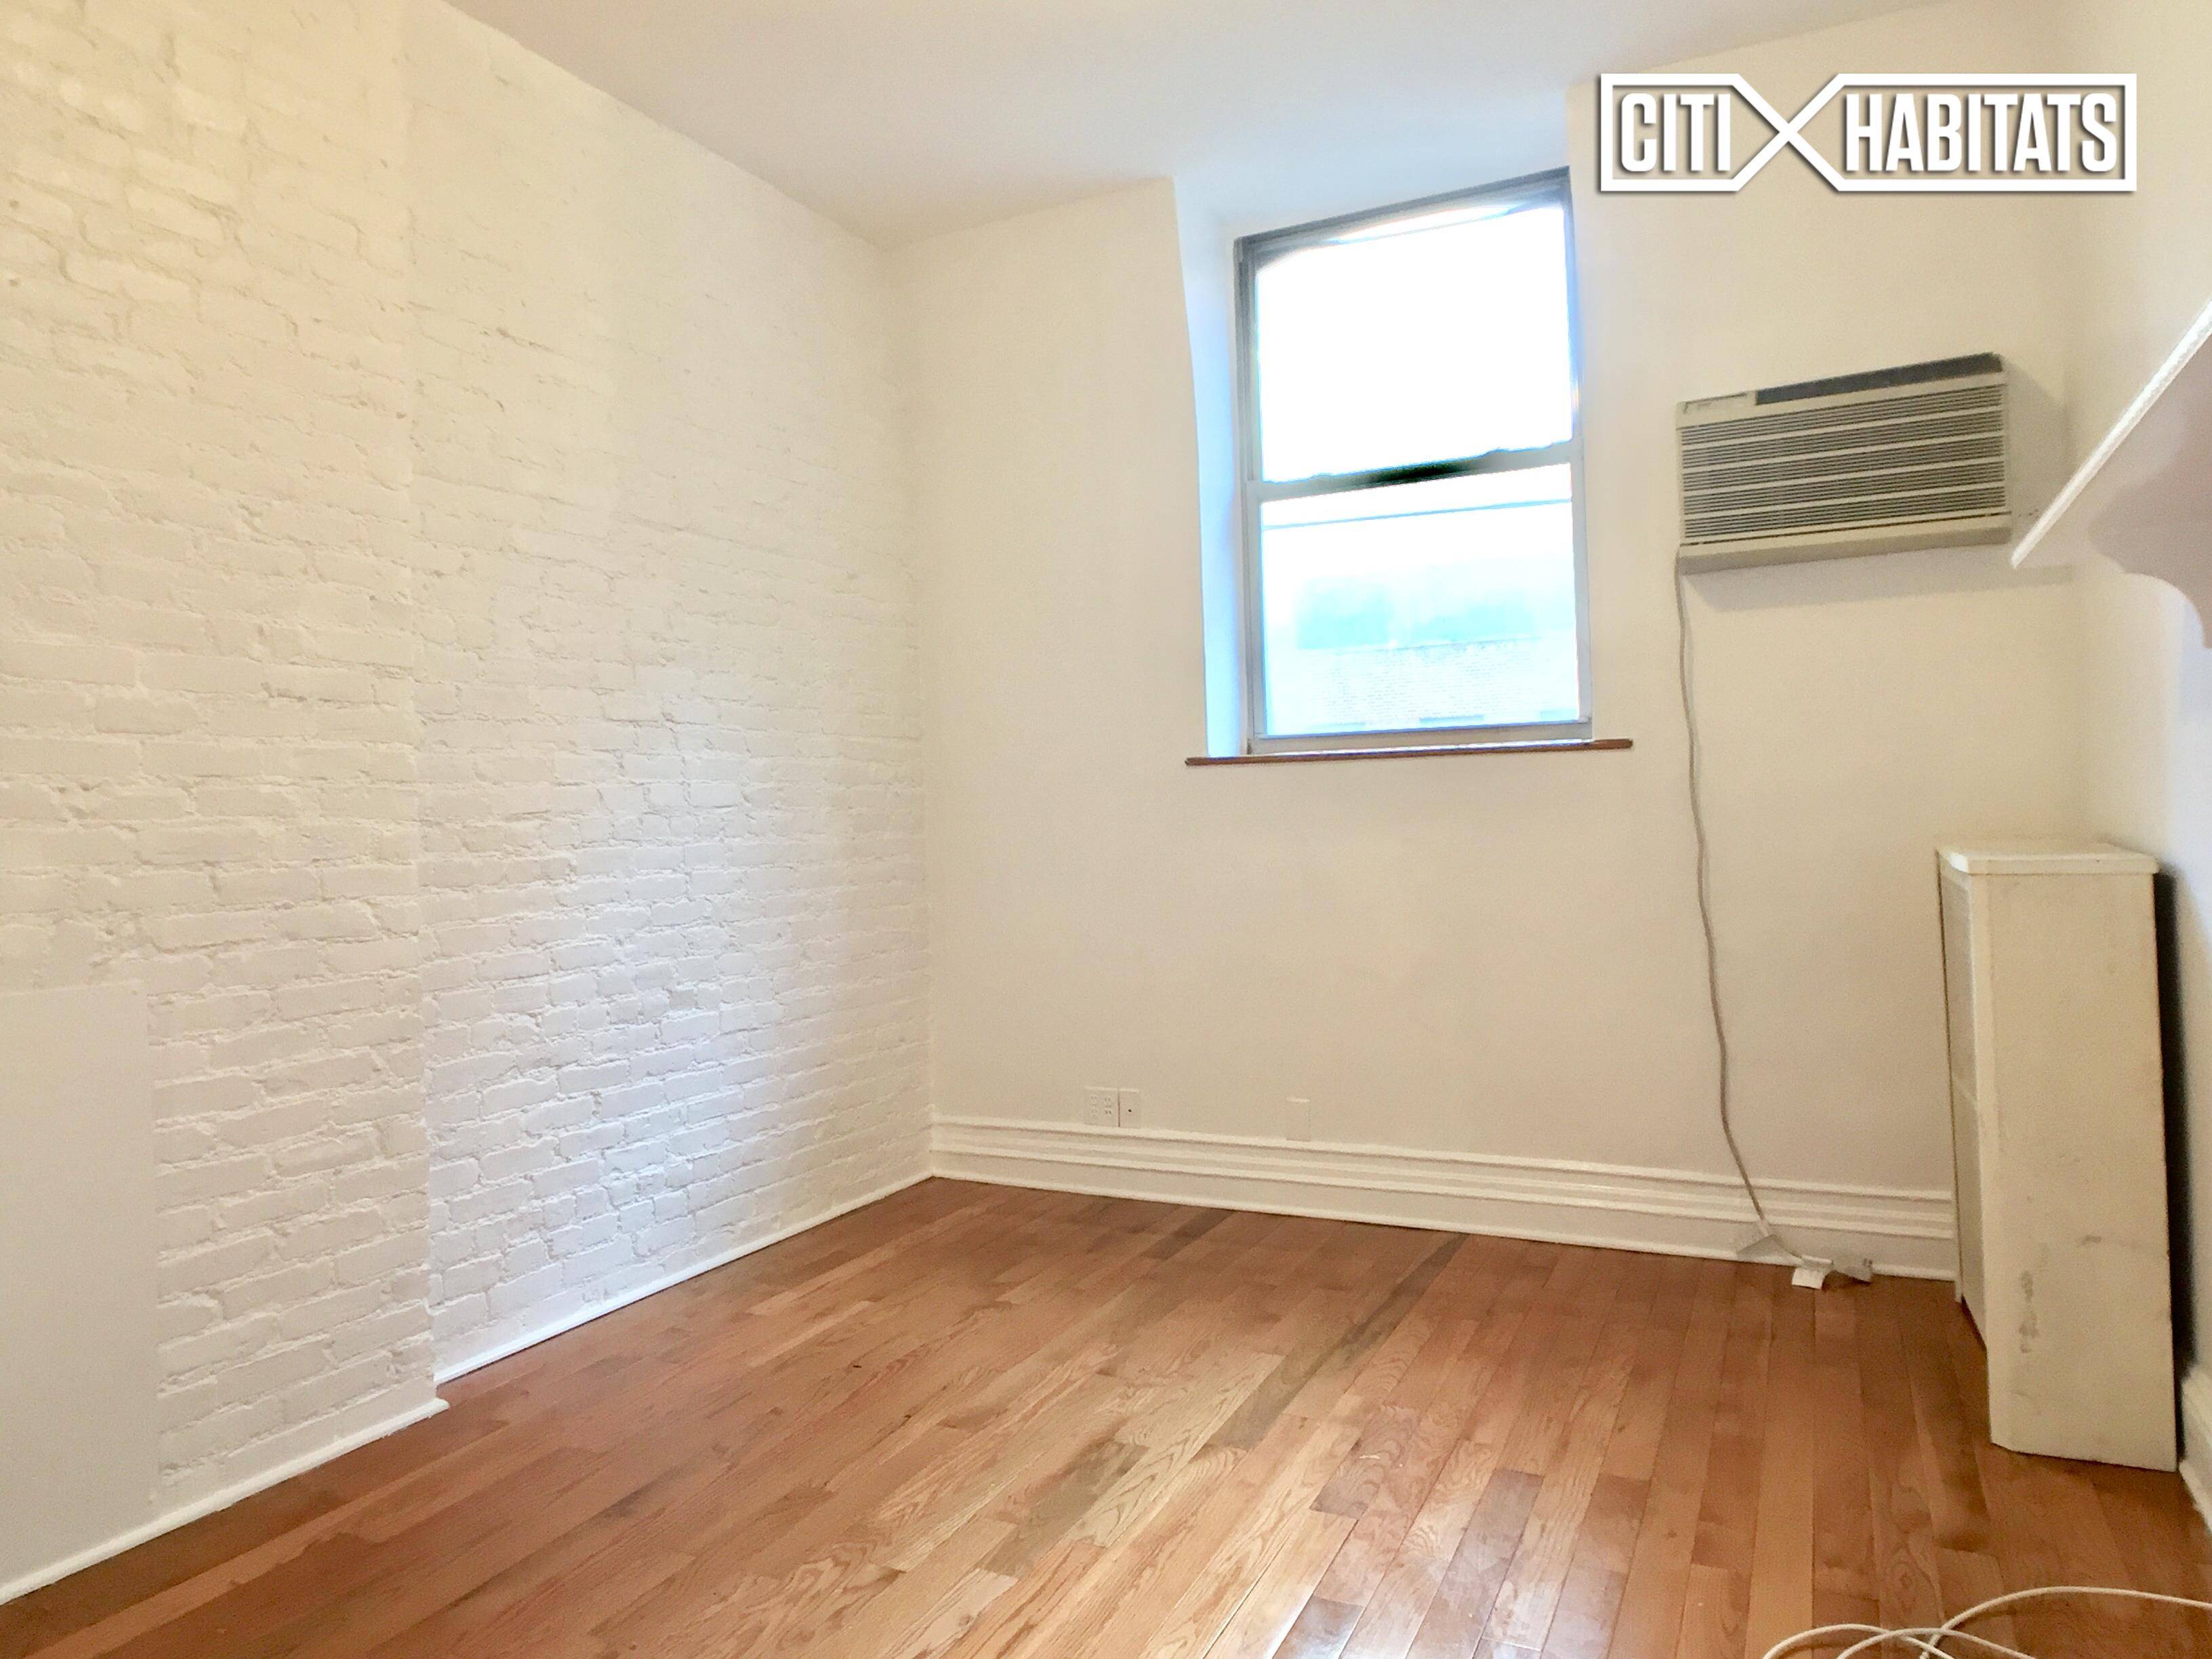 NO FEE ! Two bedroom in Murray Hill townhouse high ceilings, hardwood floors, both bedrooms with windows and closets ; close to 6, R, multiple bus lines, Grand Central and ...